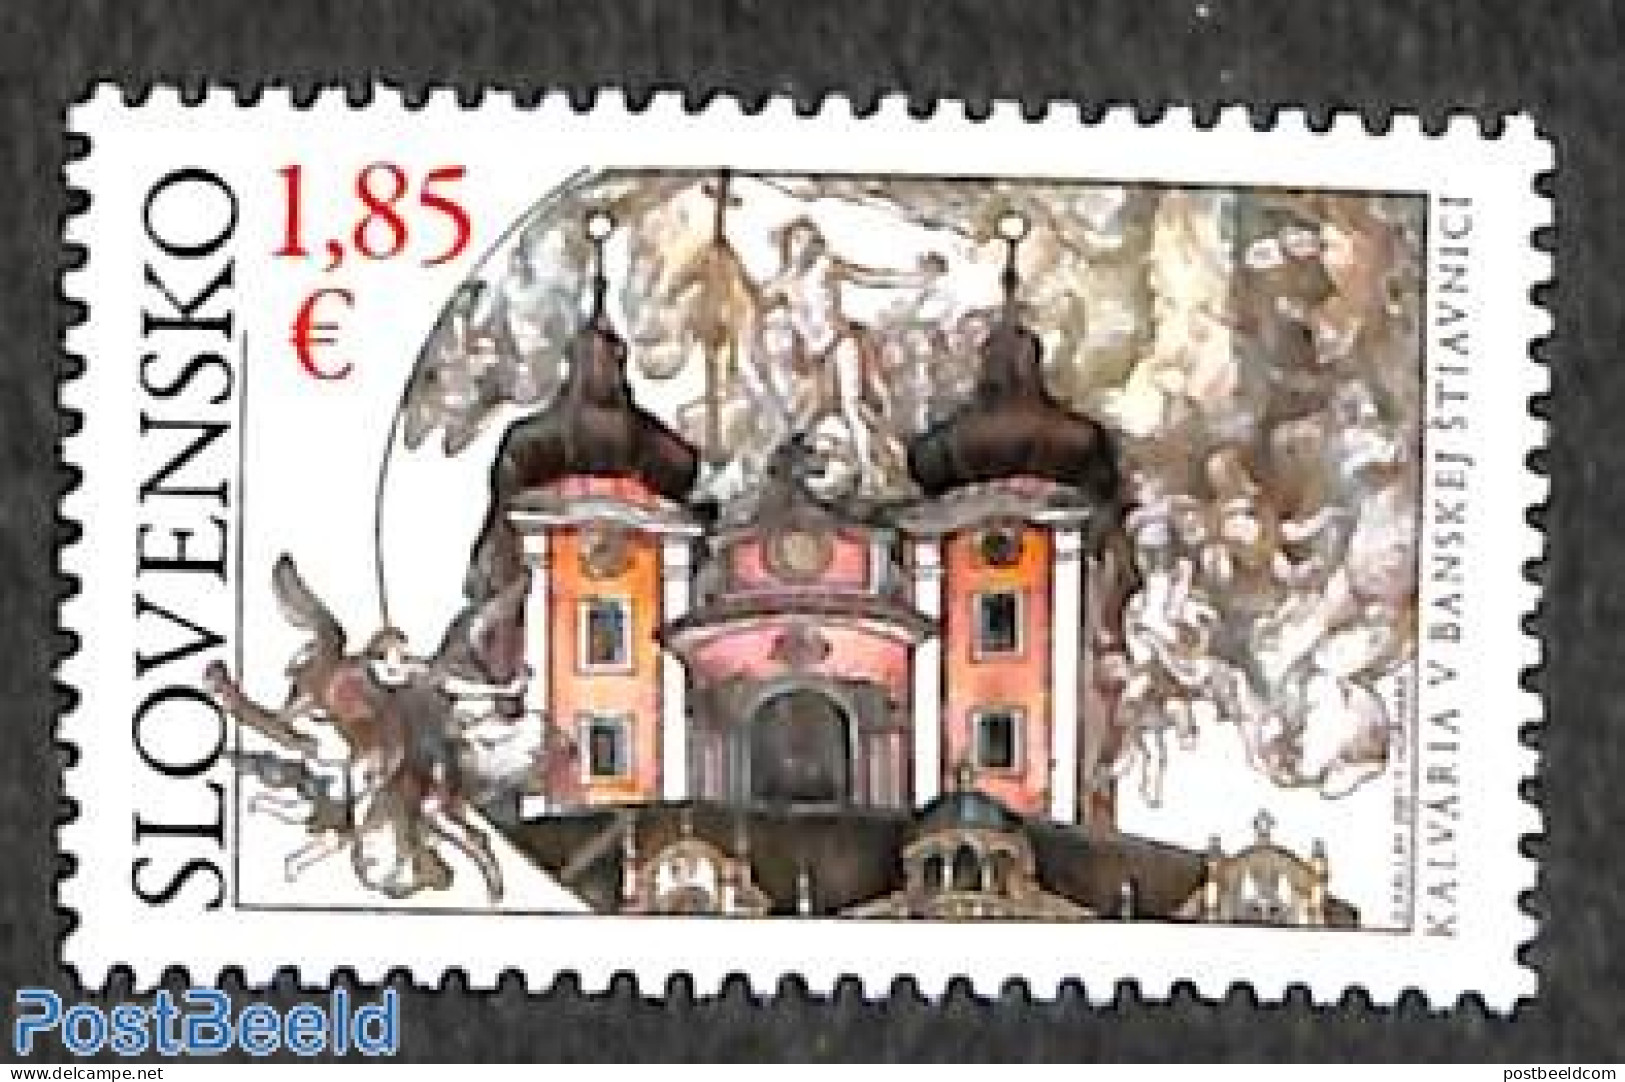 Slovakia 2021 The Cavalry 1v, Mint NH, Art - Castles & Fortifications - Ungebraucht